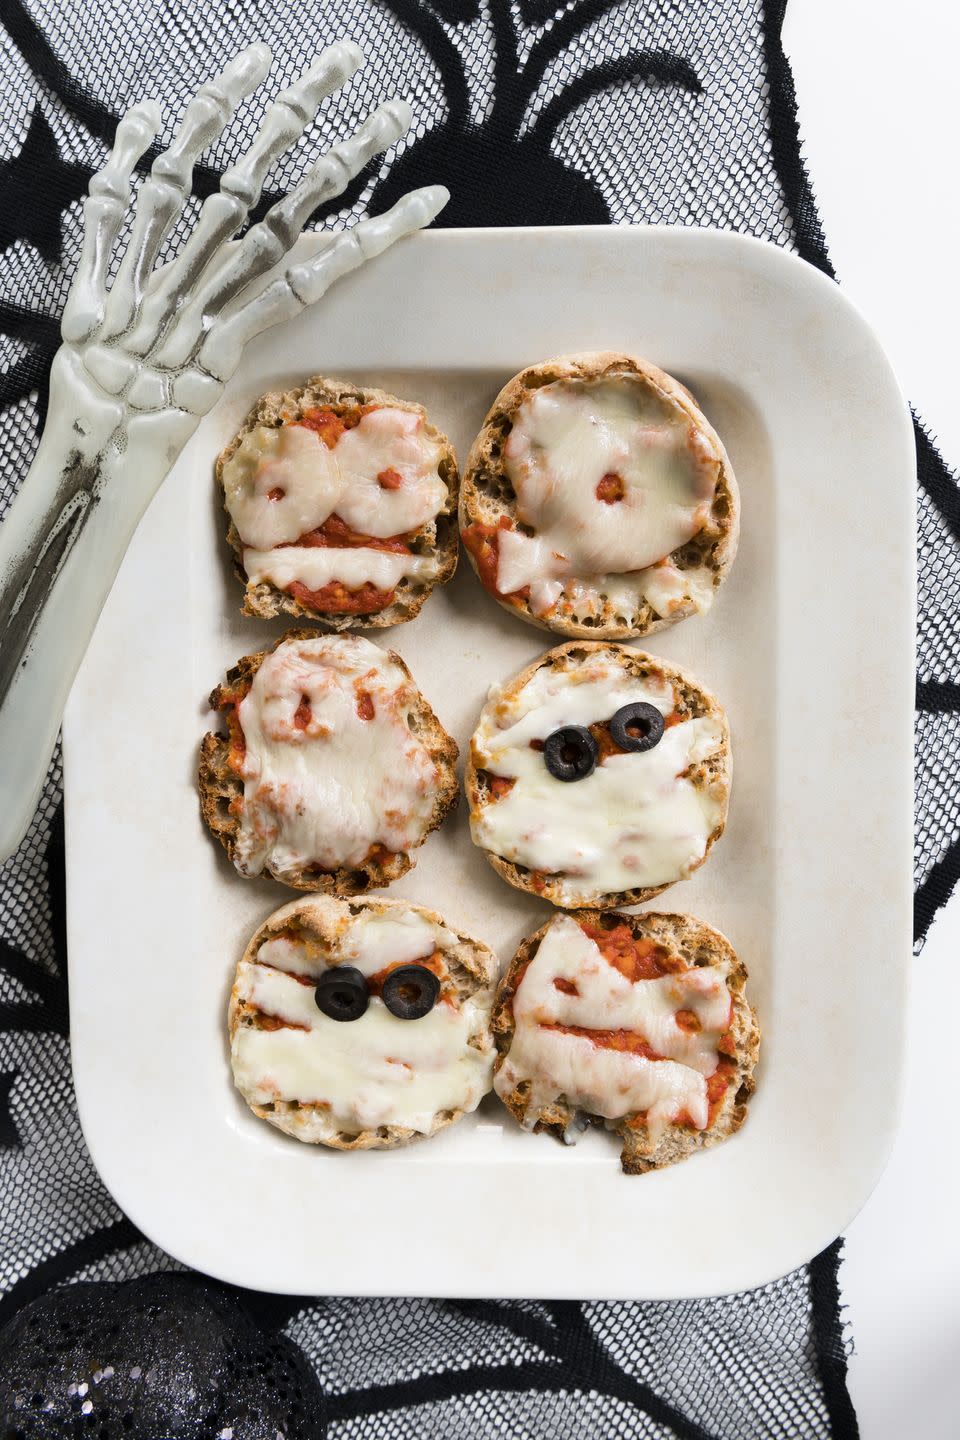 <p>You can serve your guests a batch of spooky personal pizzas by decorating homemade English muffins with sauce, cheese, and black olive eyes and baking in a preheated oven set to 375 degrees Fahrenheit for 10 minutes. And if you're looking to save on prep time, then you can always use store-bought English muffins instead. </p><p>Get the <a href="https://www.womansday.com/food-recipes/food-drinks/recipes/a40296/homemade-english-muffins-3873/" rel="nofollow noopener" target="_blank" data-ylk="slk:Homemade English Muffin recipe" class="link "><strong>Homemade English Muffin recipe</strong></a>. </p>